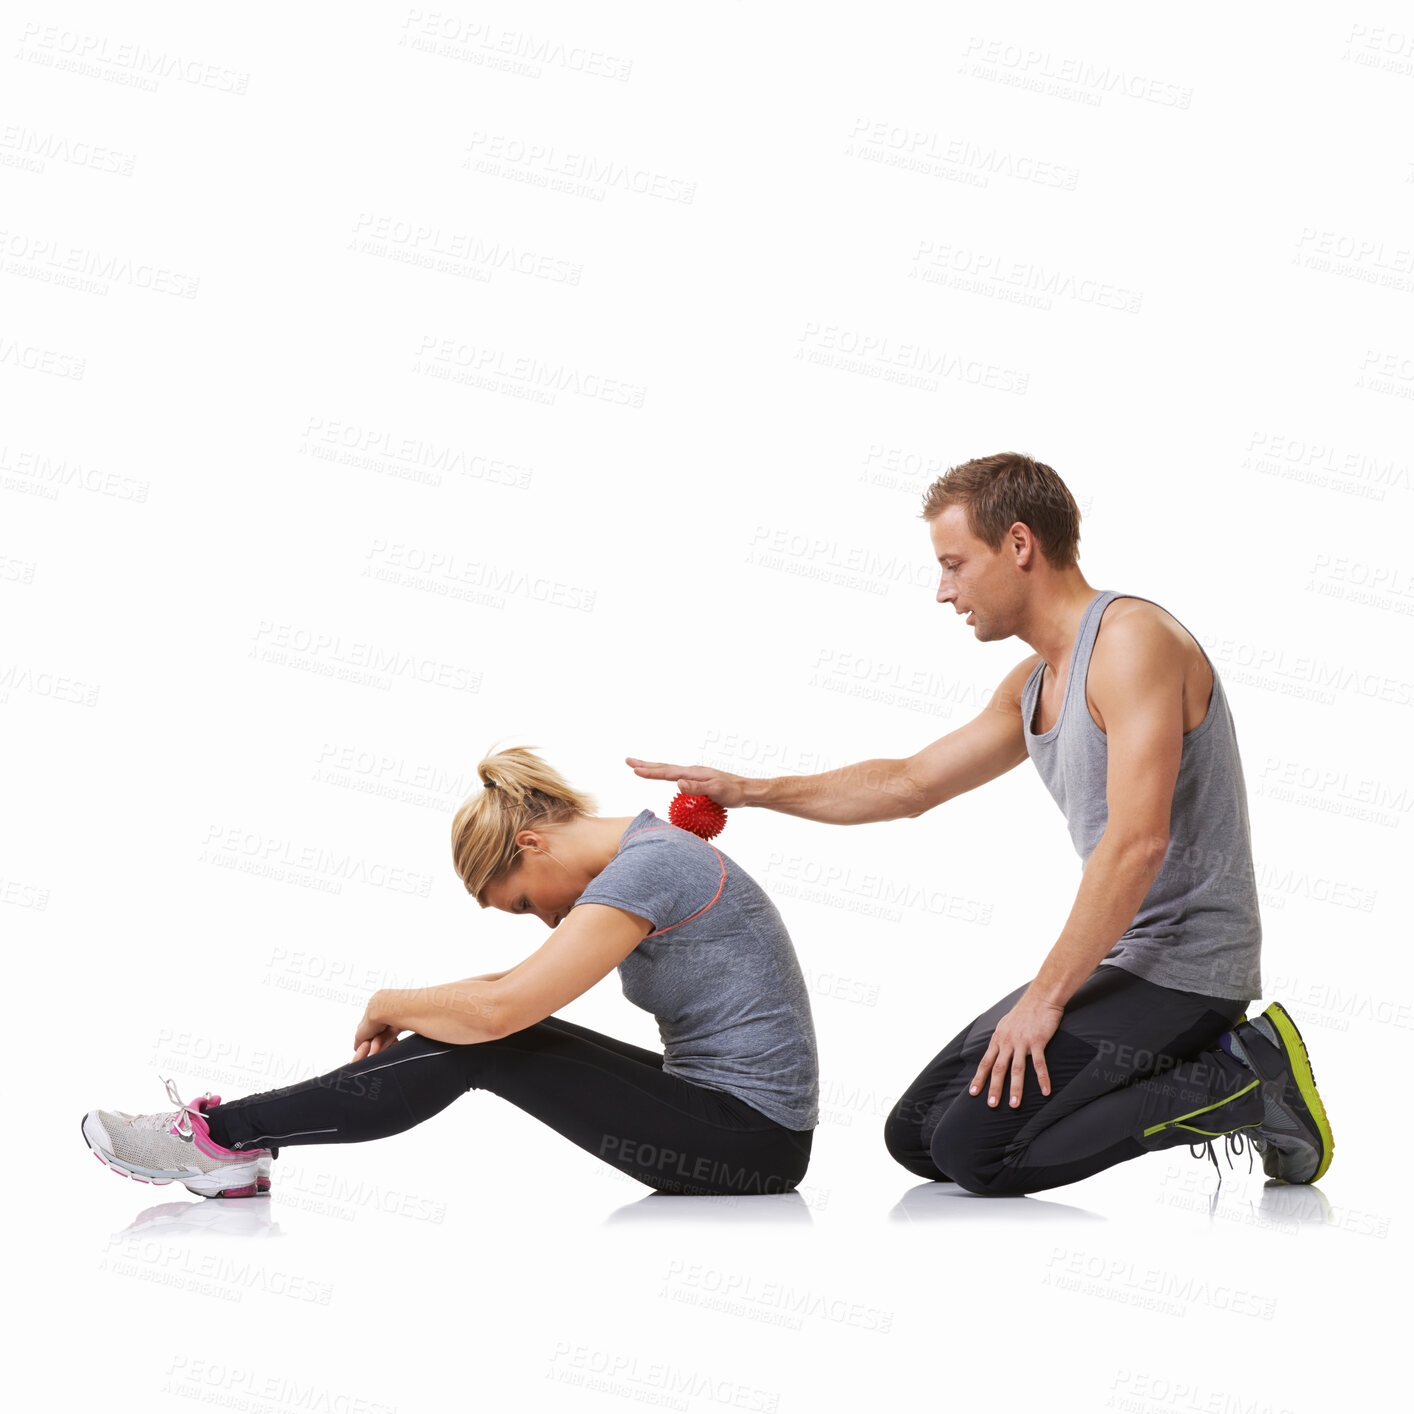 Buy stock photo A young man using a massage ball on his female friend's back